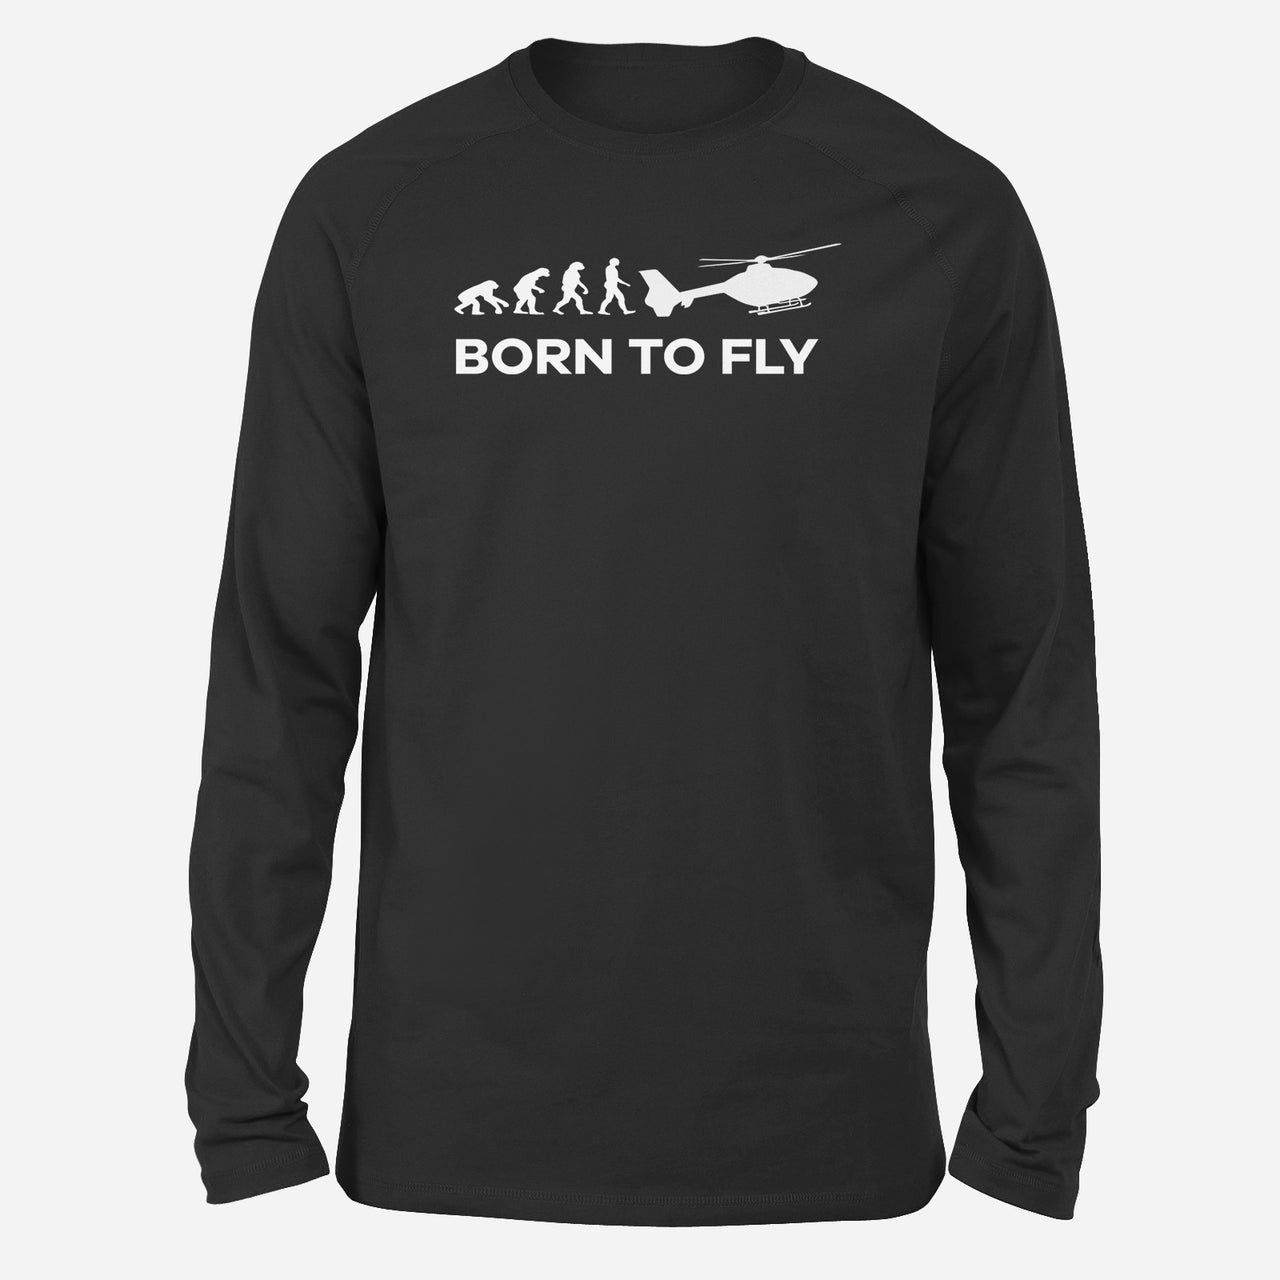 Born To Fly Helicopter Designed Long-Sleeve T-Shirts